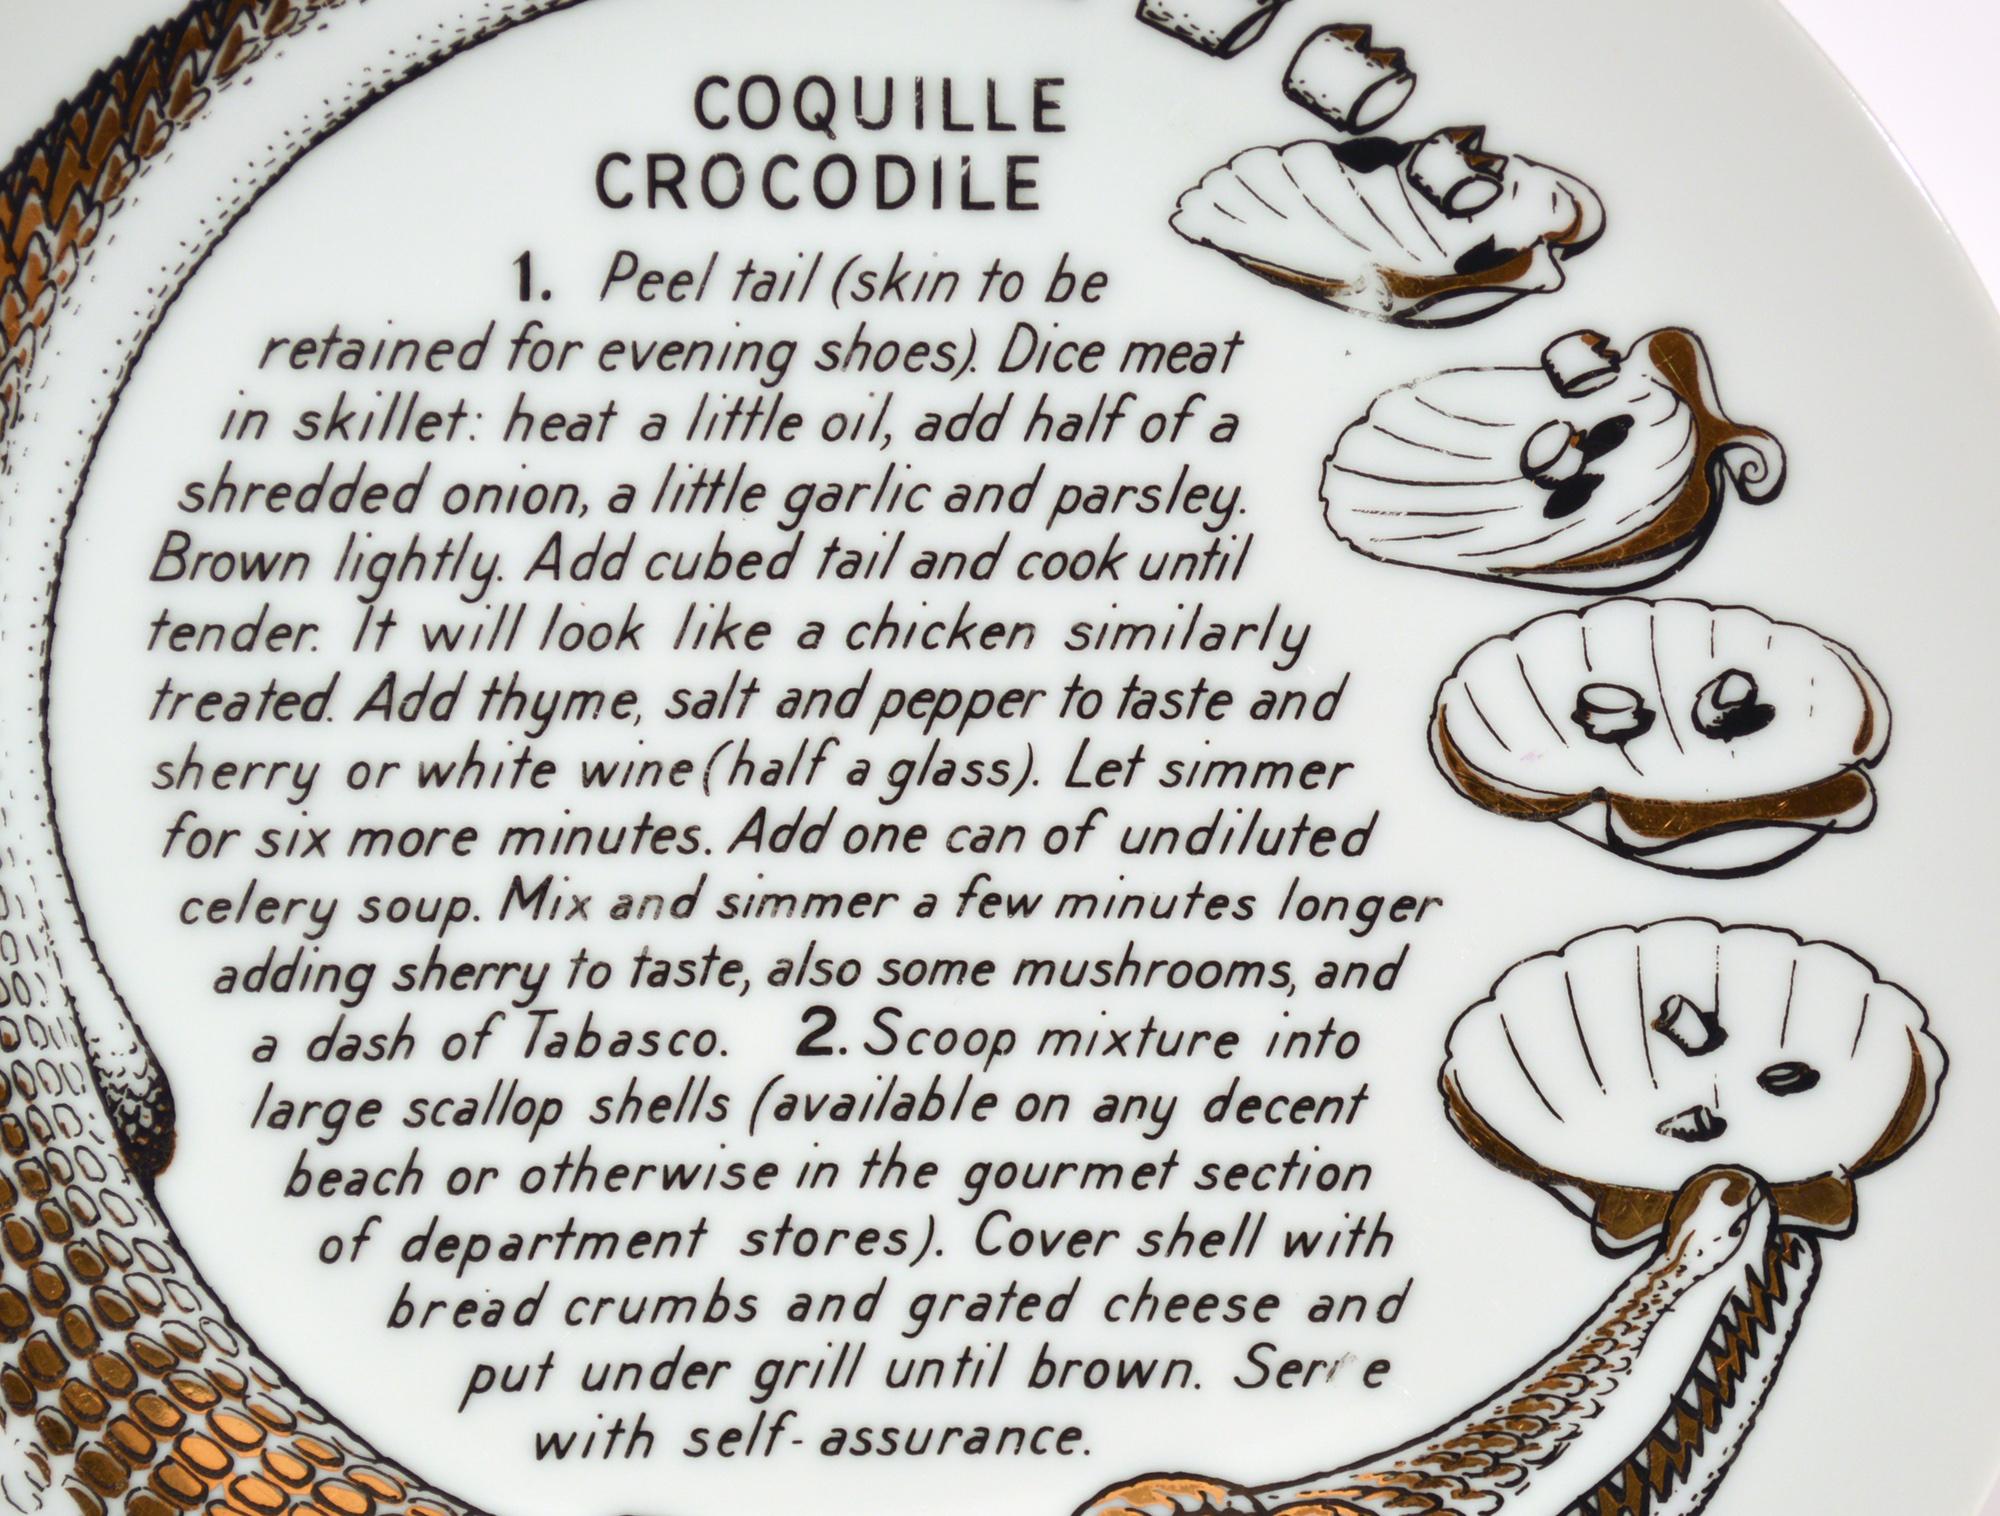 Piero Fornasetti Porcelain recipe Cook plate,
Coquille Crocodile,
Made for Fleming Joffe- Limited Private Edition,
1970's

Piero Fornasetti was commissioned by Fleming Joffe, a hide Company in New York to make a series of fanciful recipe plates to